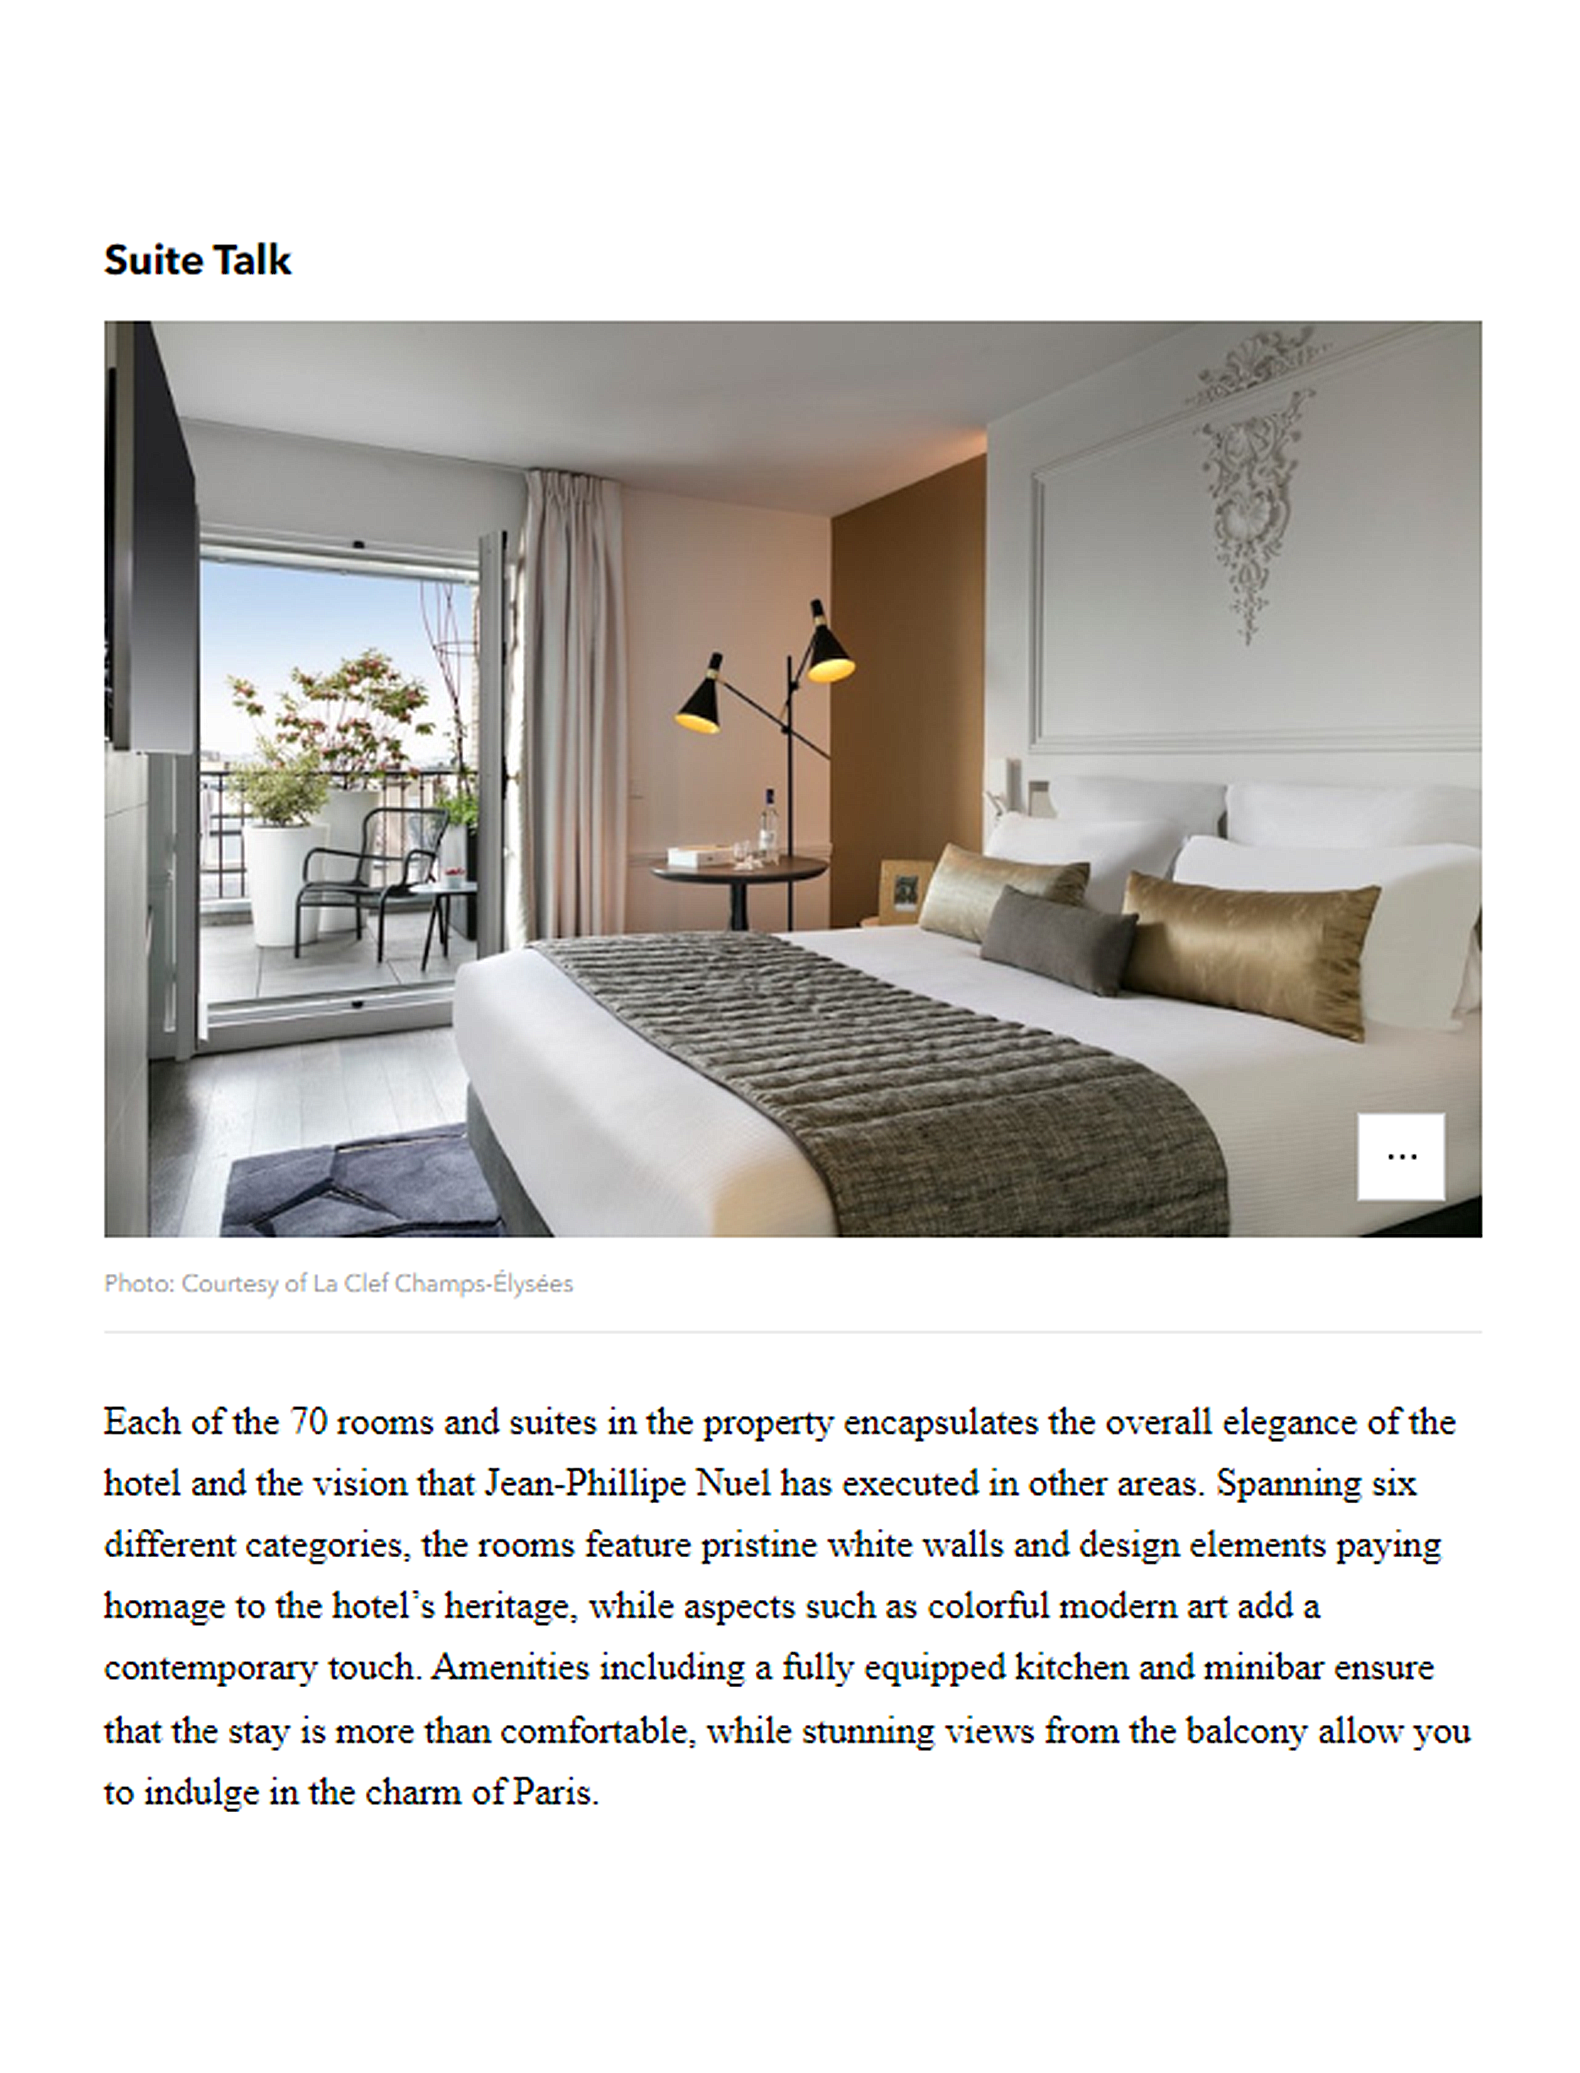 An article from Vogue Arabia on La Clef Champs-Elysées hotel